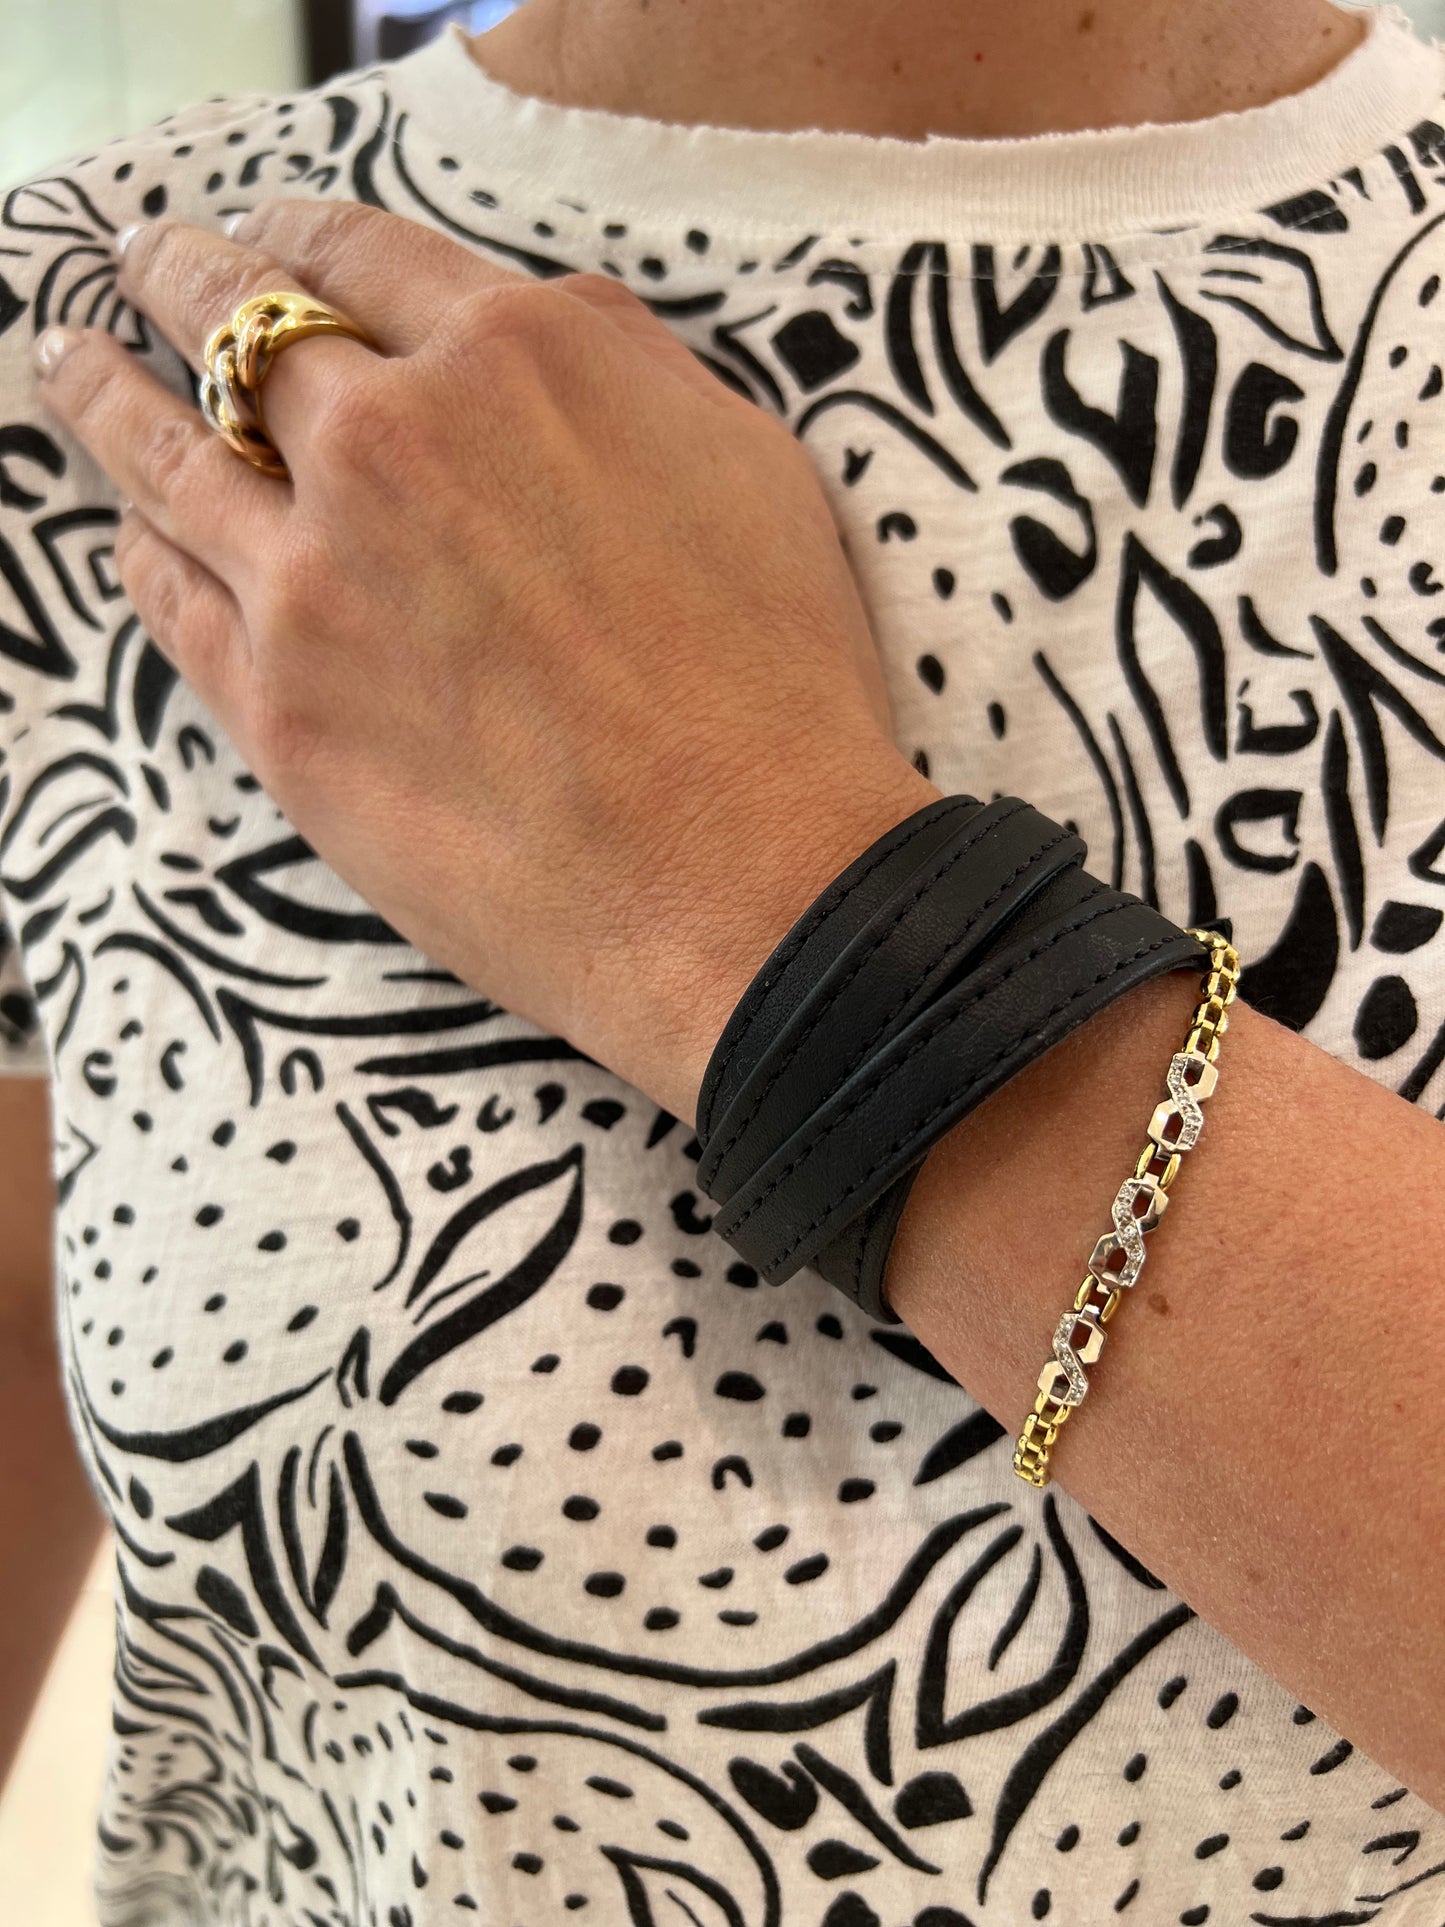 Handcrafted Black Leather & Gold-Plated Accents Four Times Wrapped Bracelet by LALÉ Bracelets